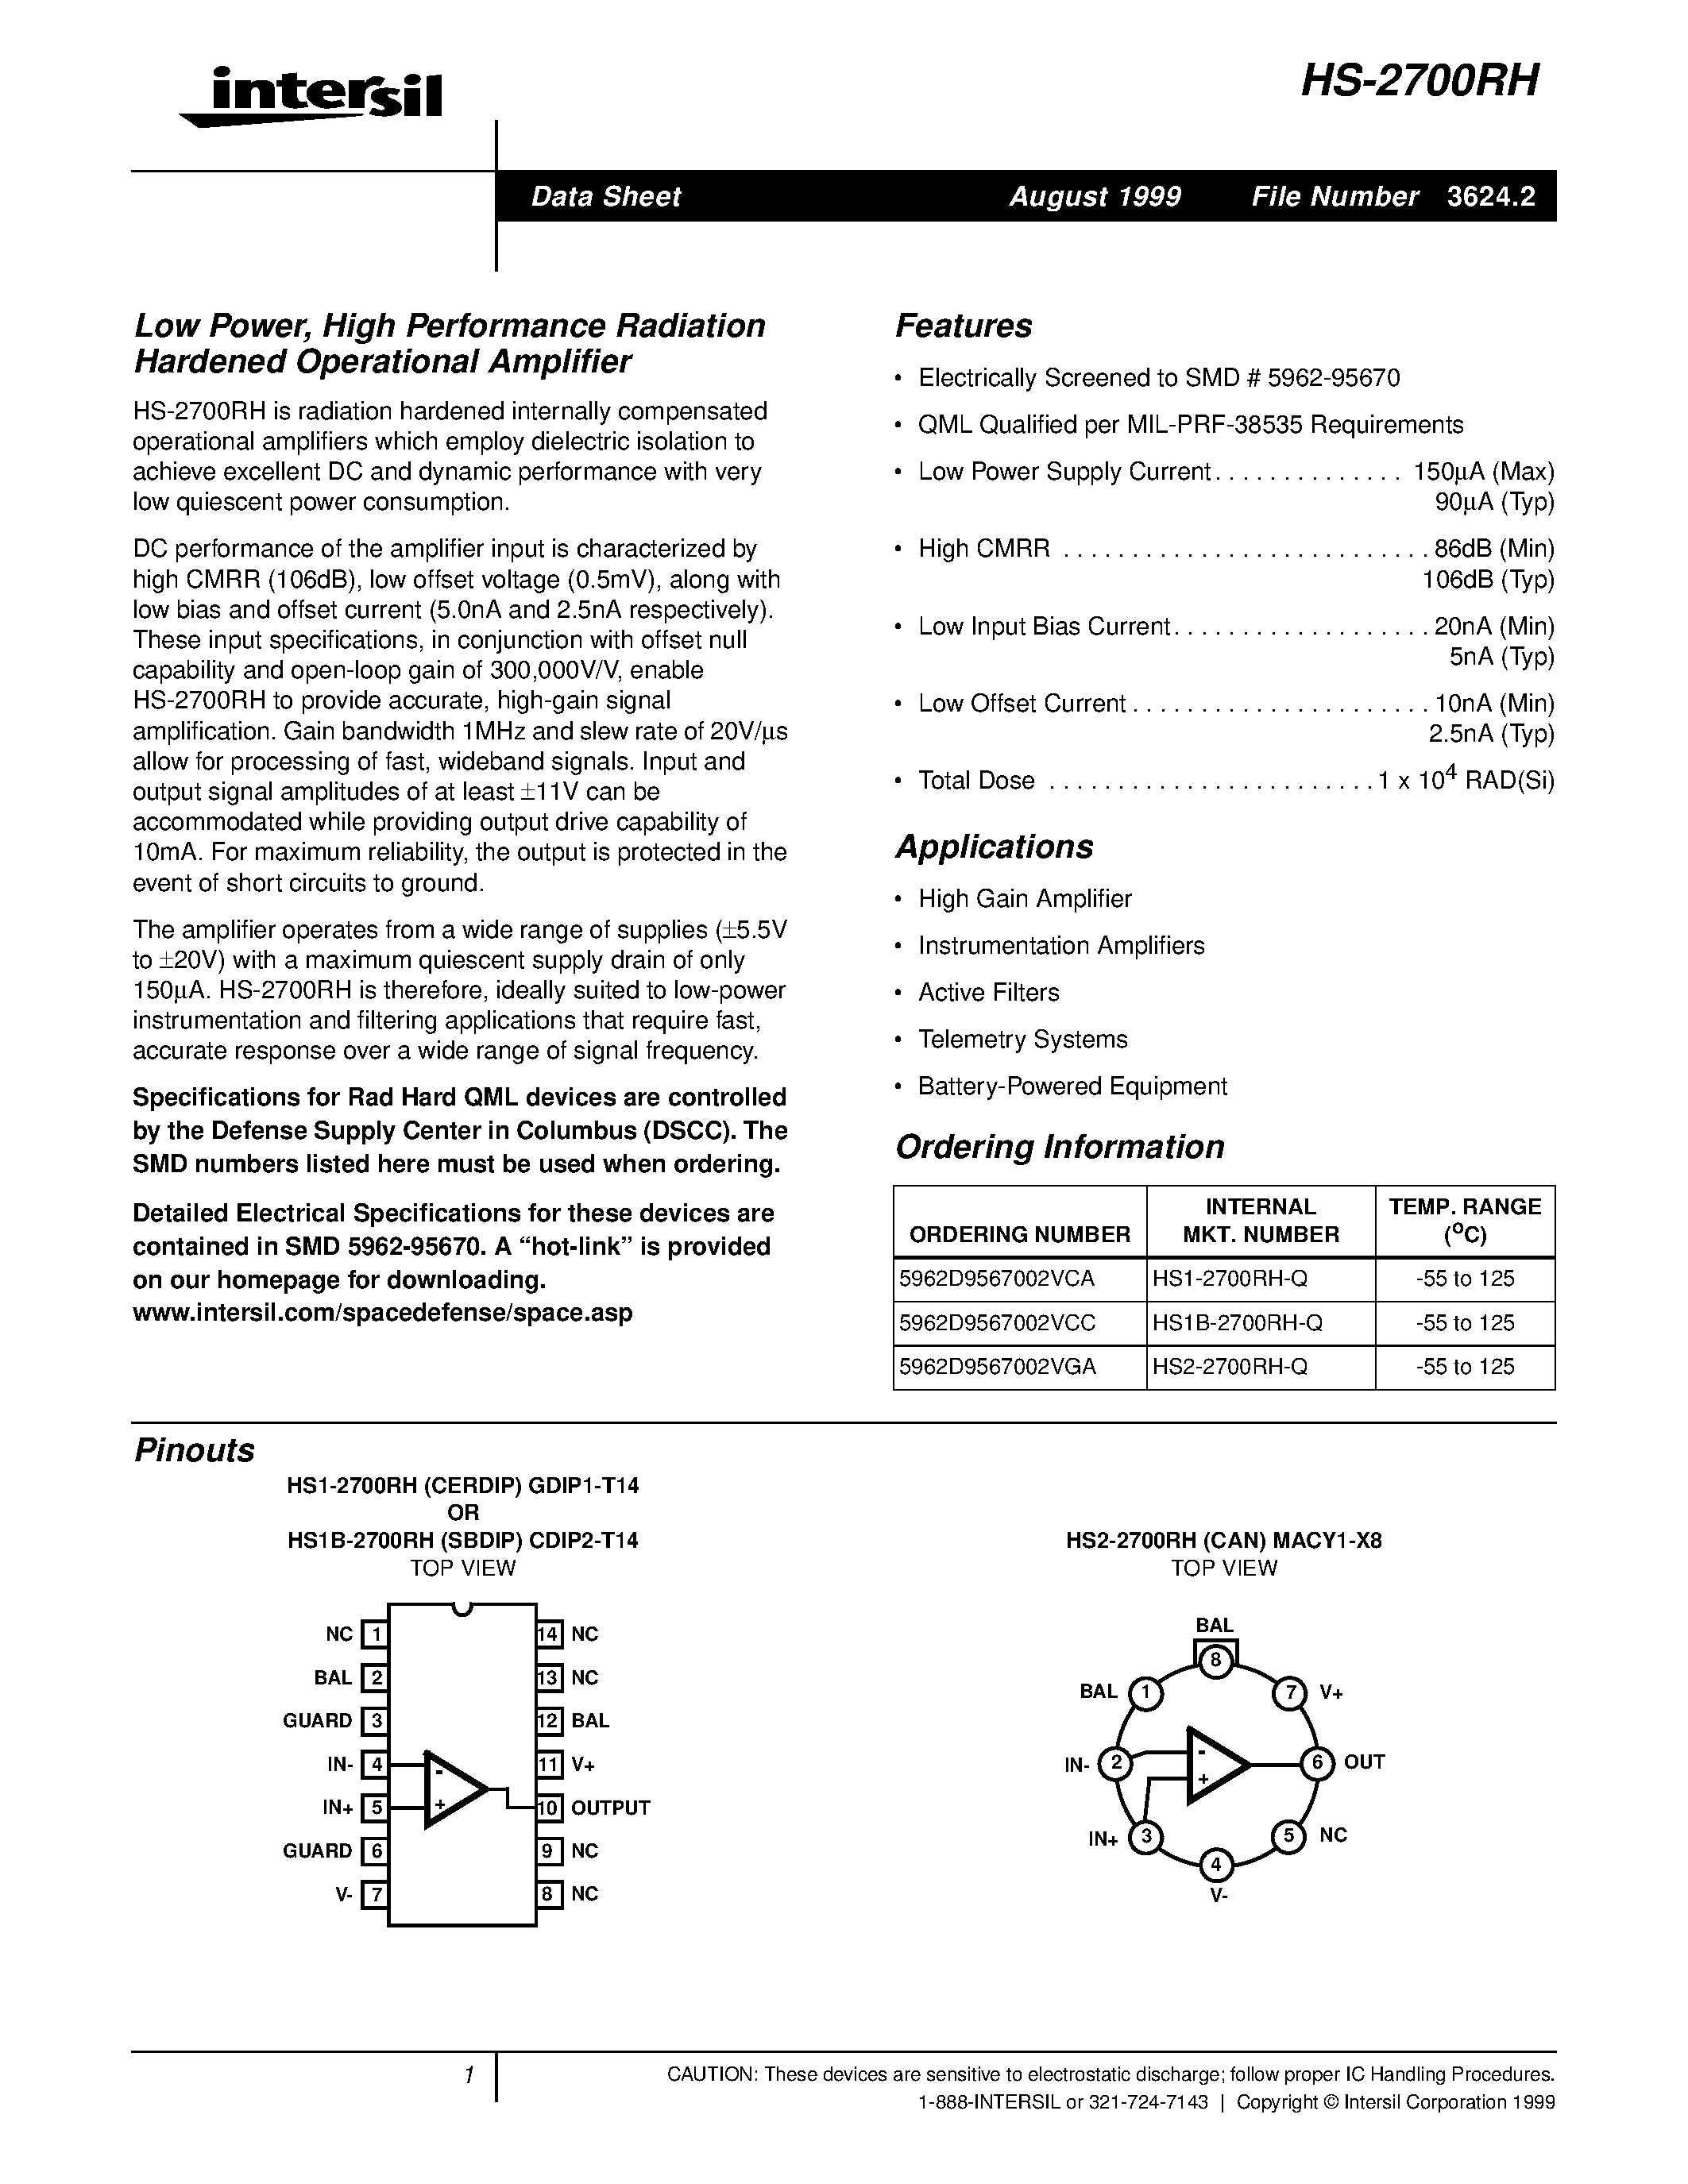 Datasheet HS2-2700RH-Q - Low Power/ High Performance Radiation Hardened Operational Amplifier page 1